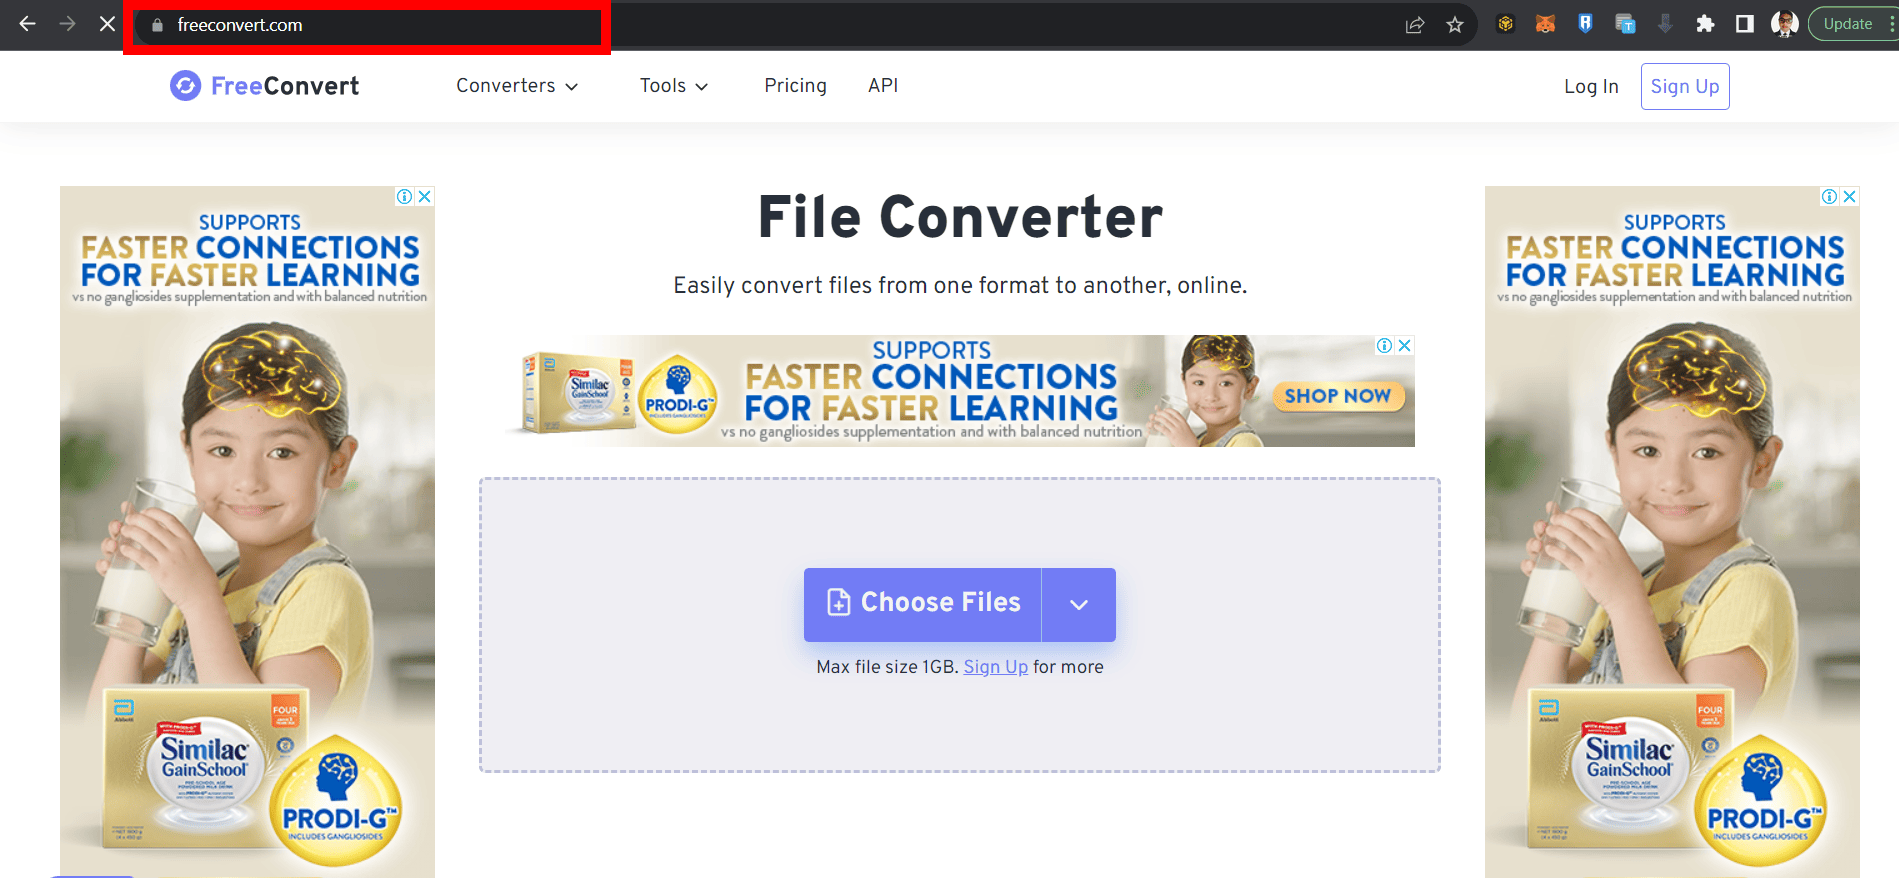 How To Reduce WAV File Size Using FreeConvert: Step 1